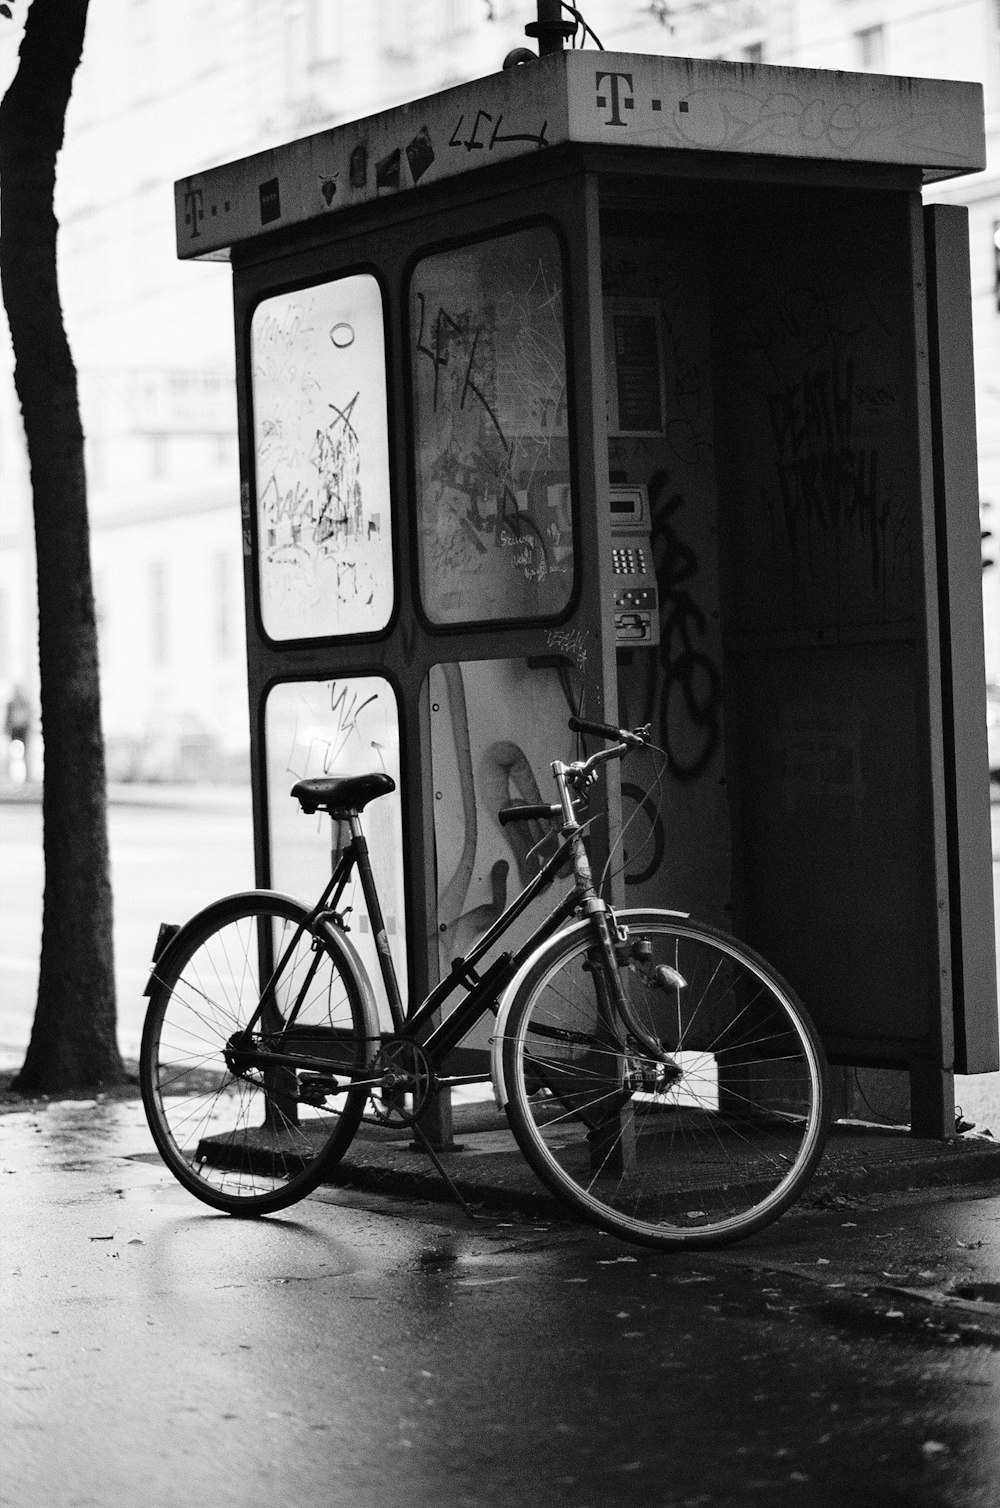 a bicycle parked next to a phone booth